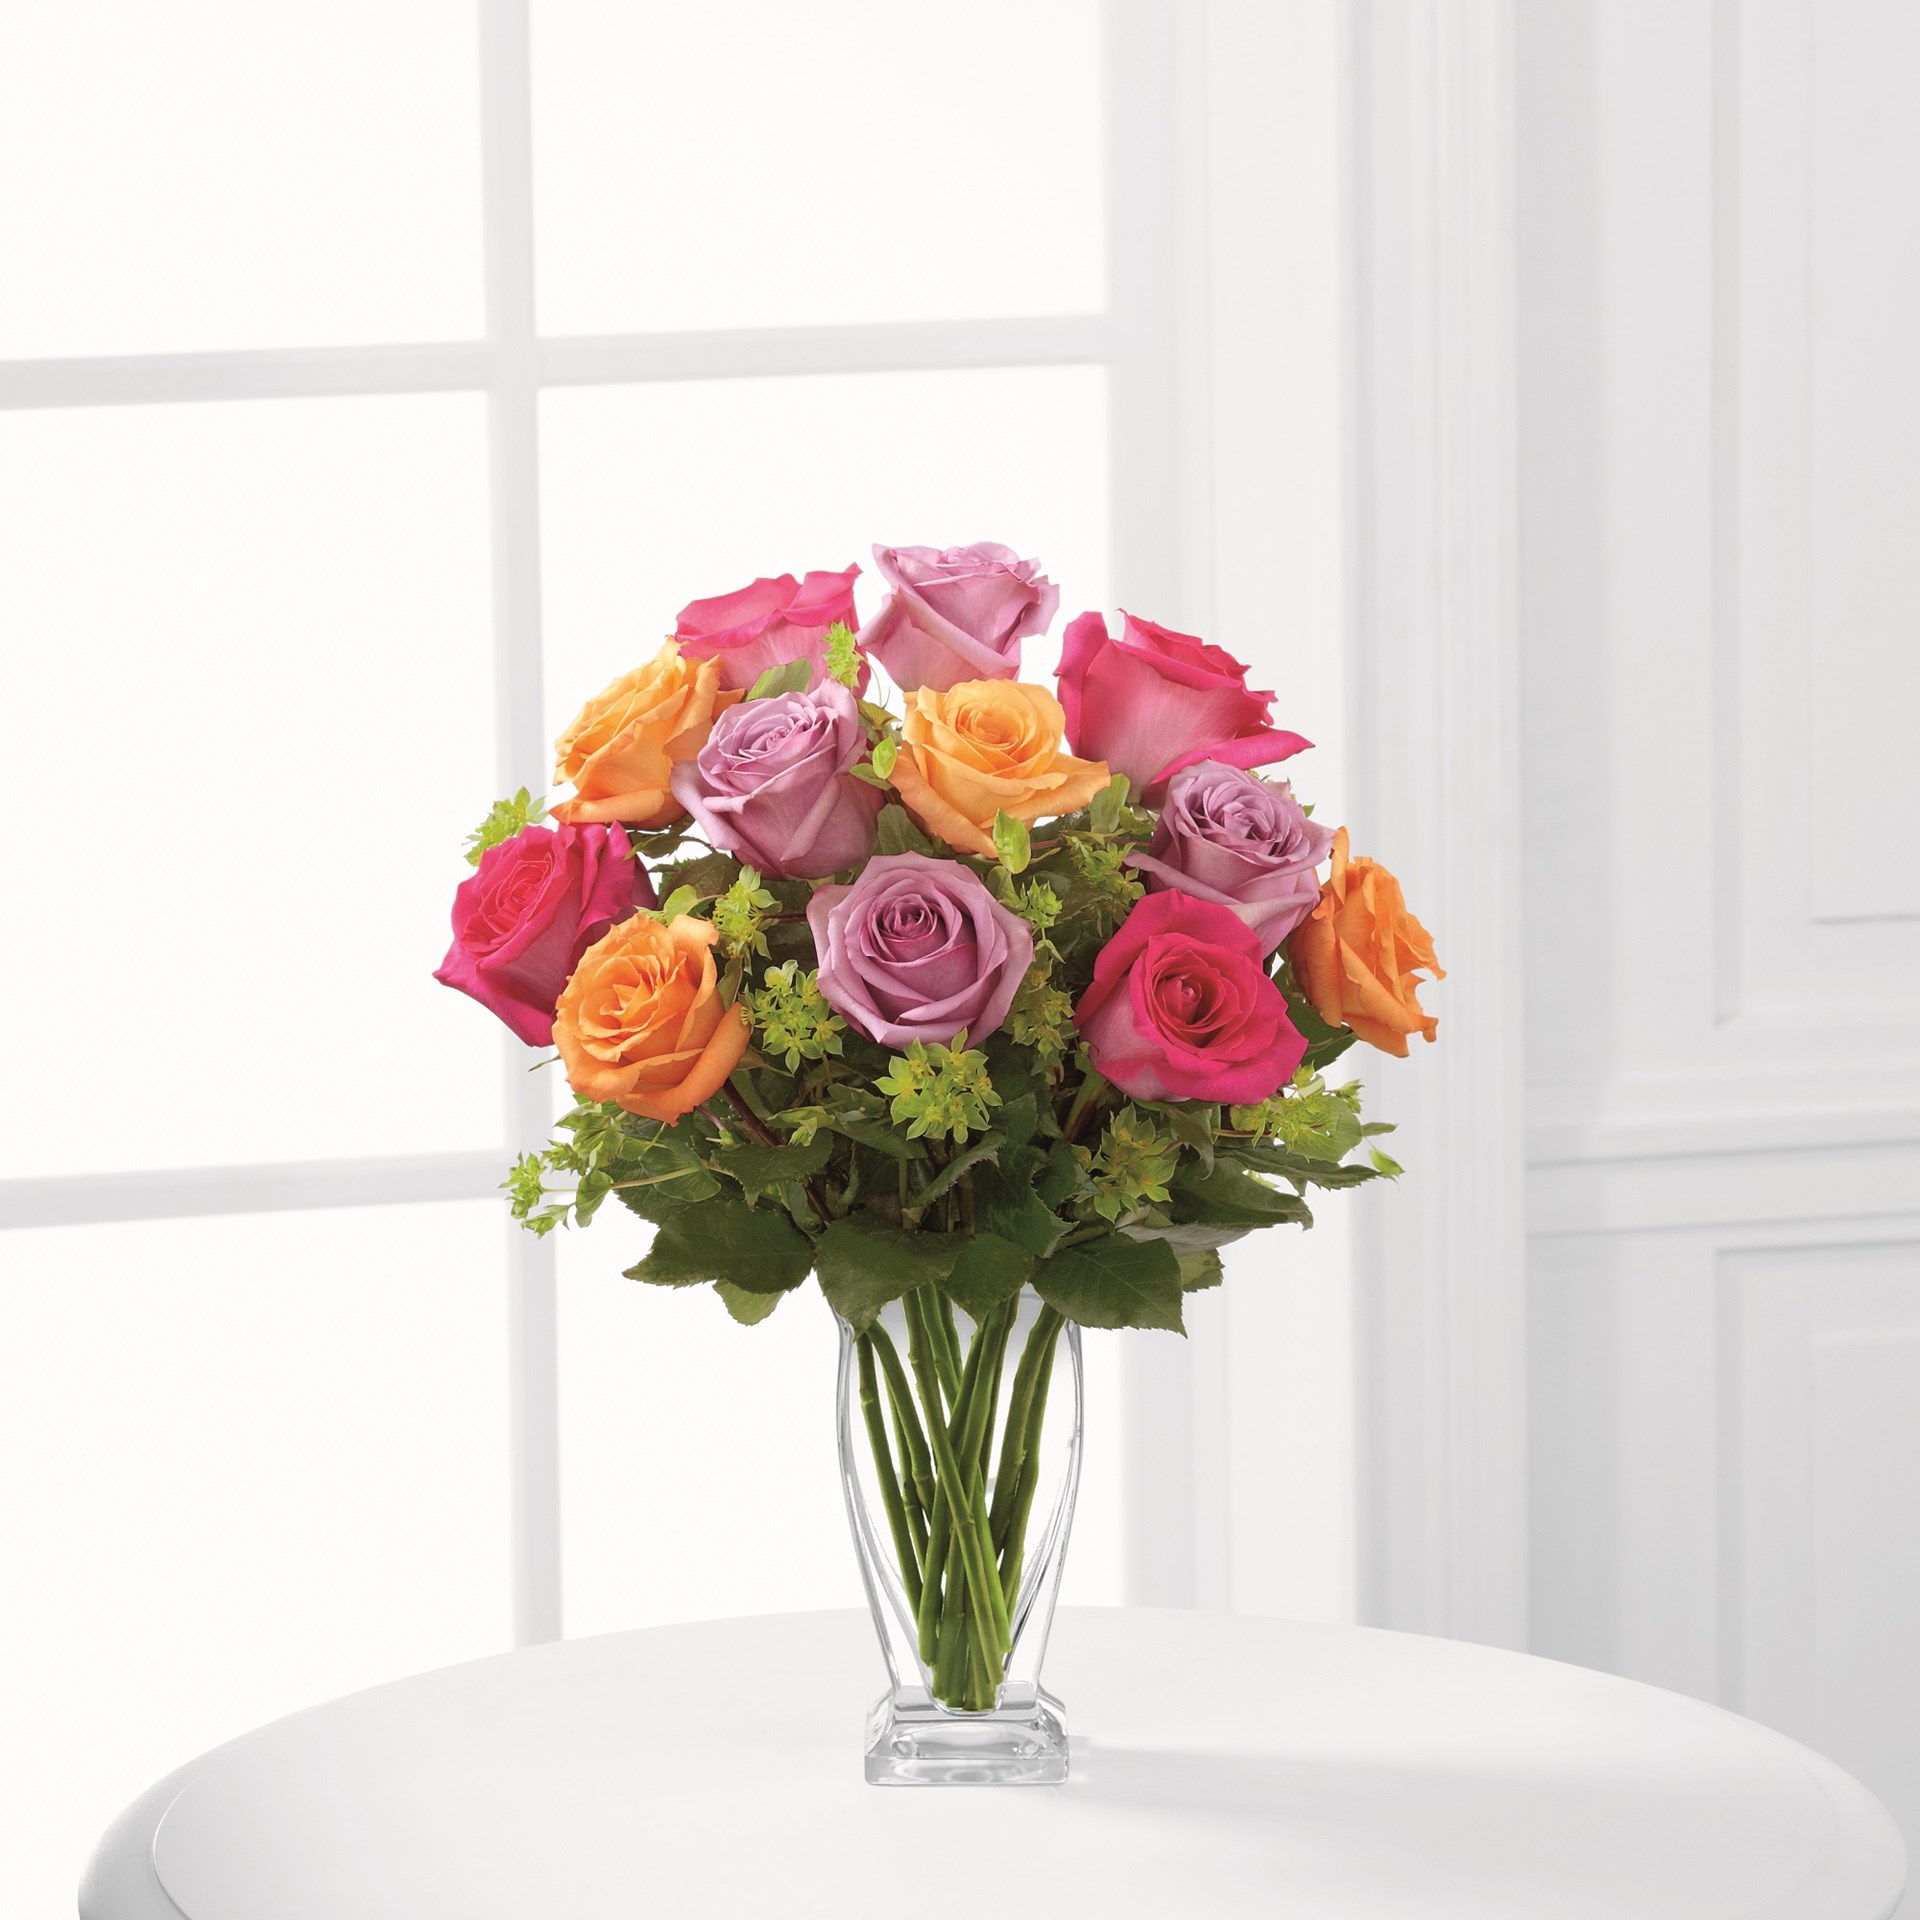 product image for The Pure Enchantment Rose Bouquet by FTD - VASE INCLUDED